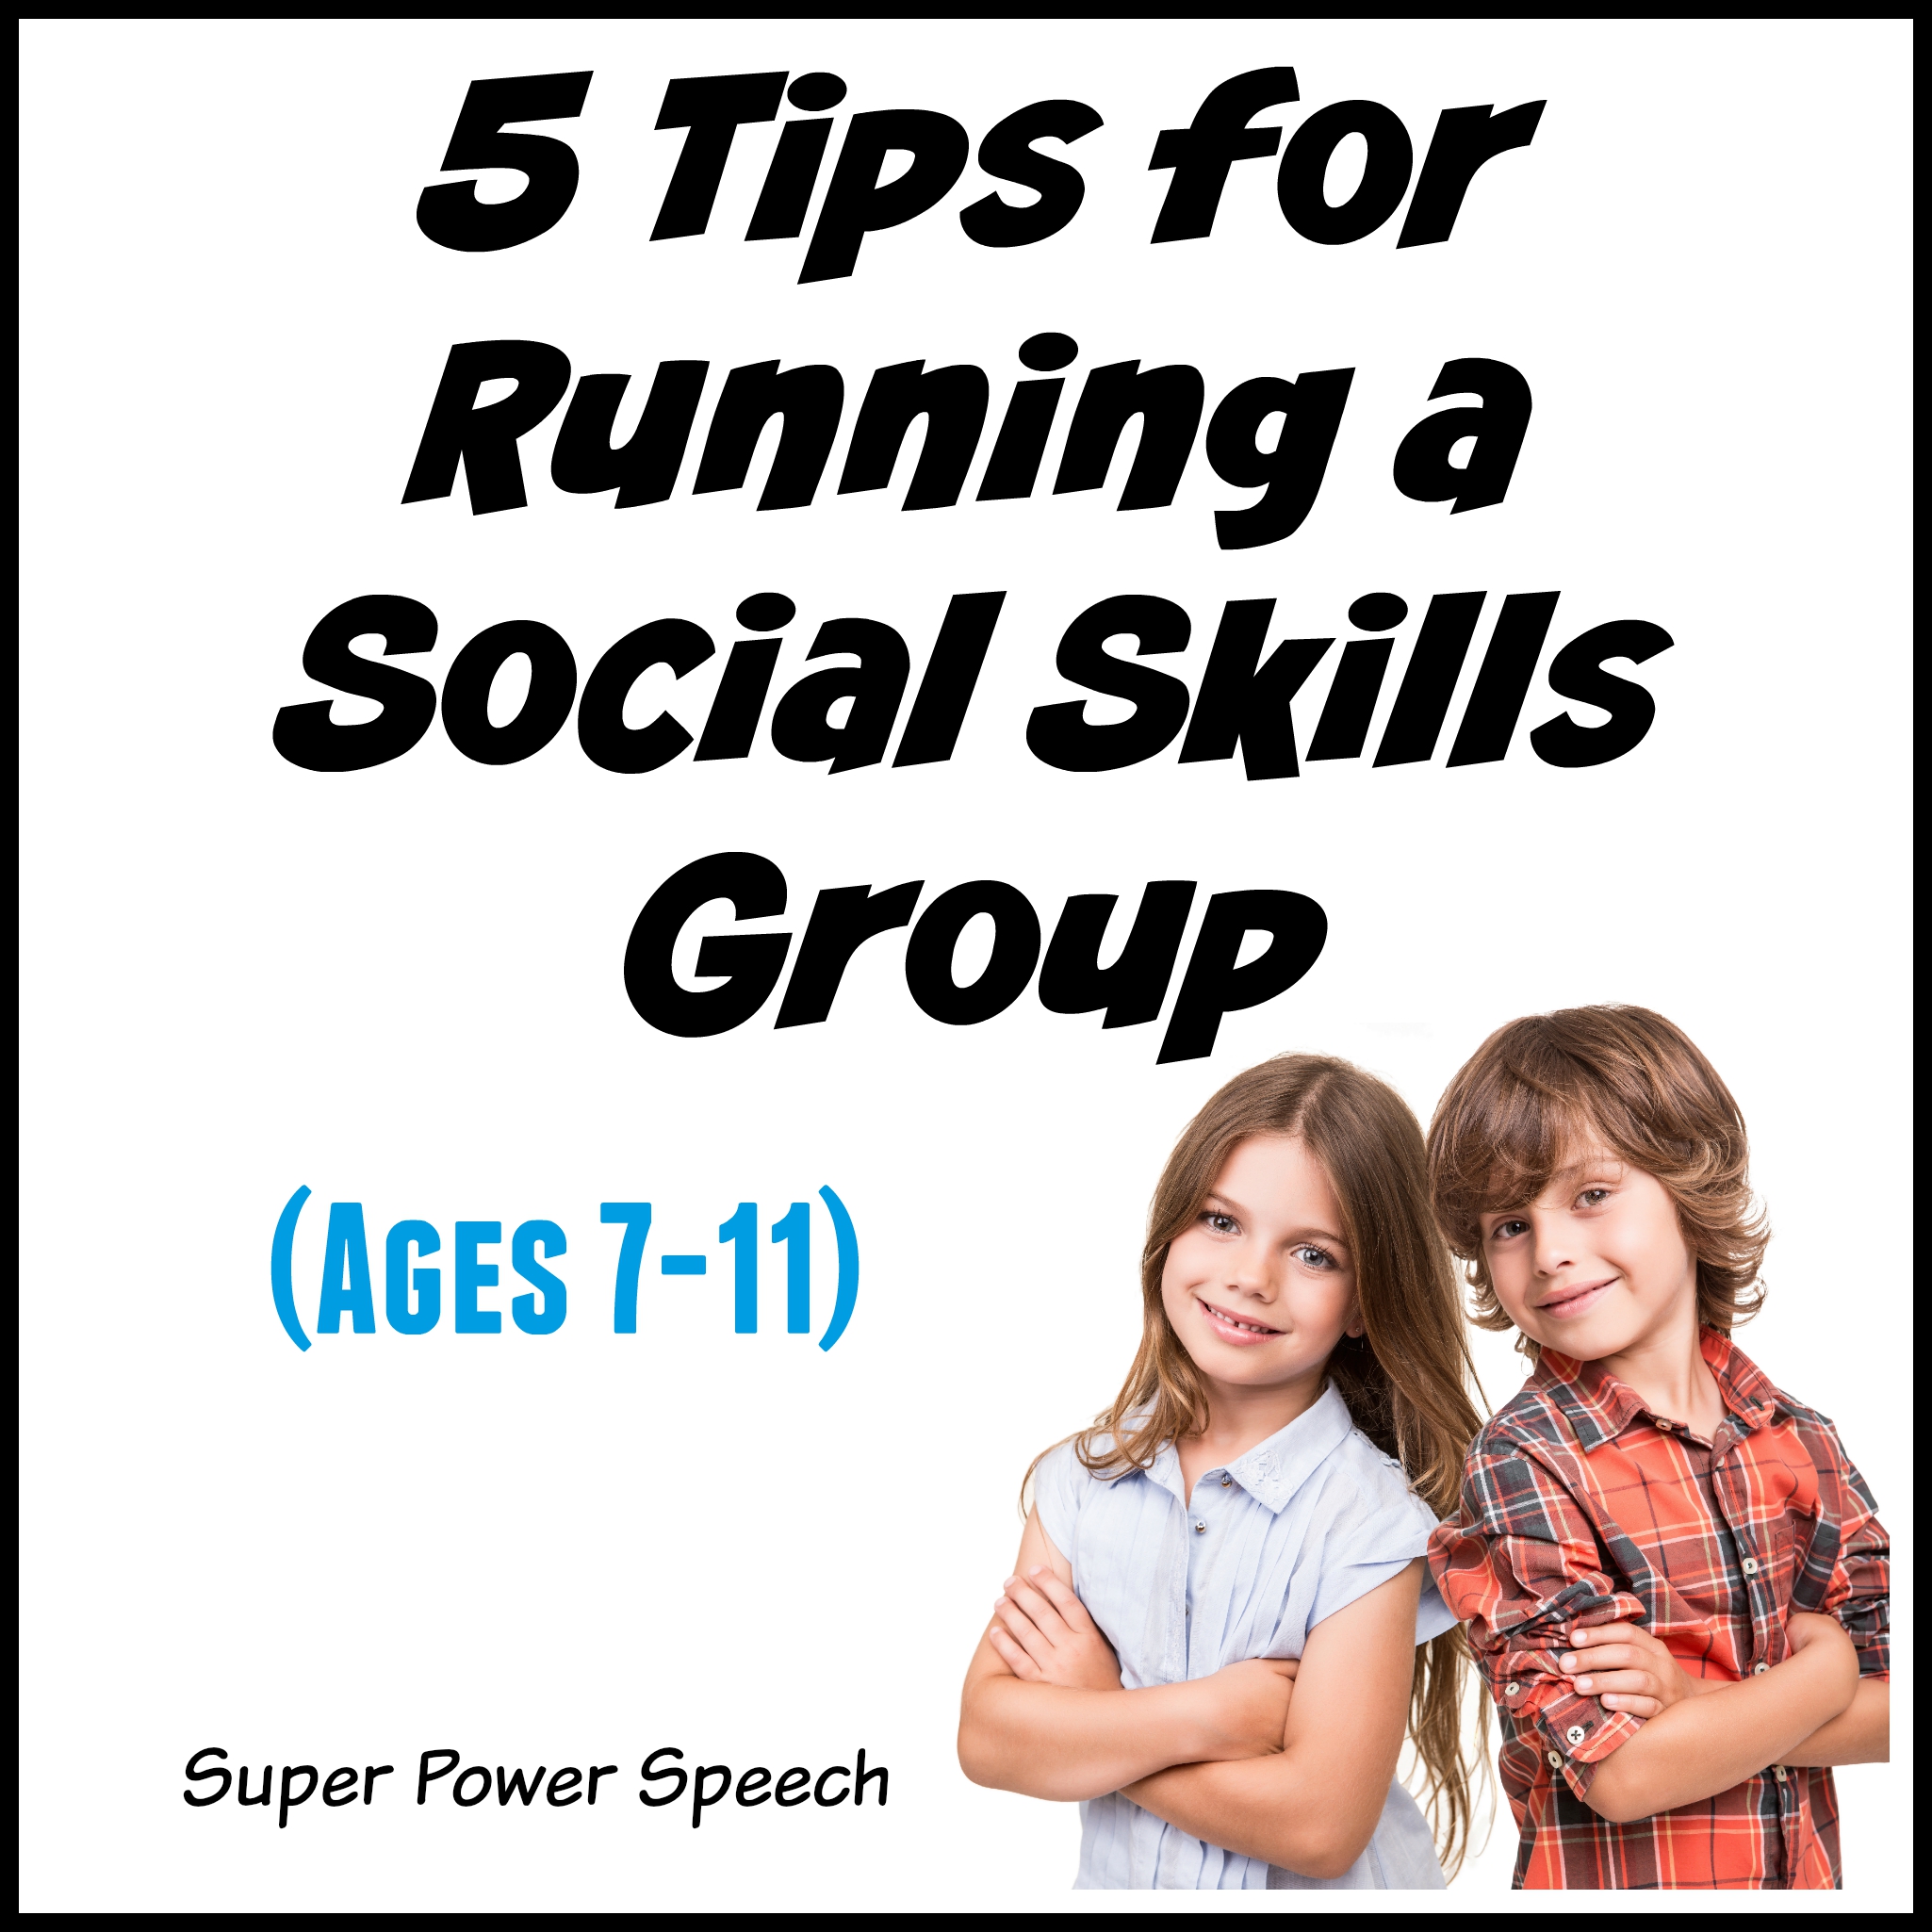 5 Tips for Running a Social Skills Group (Ages 7-11)